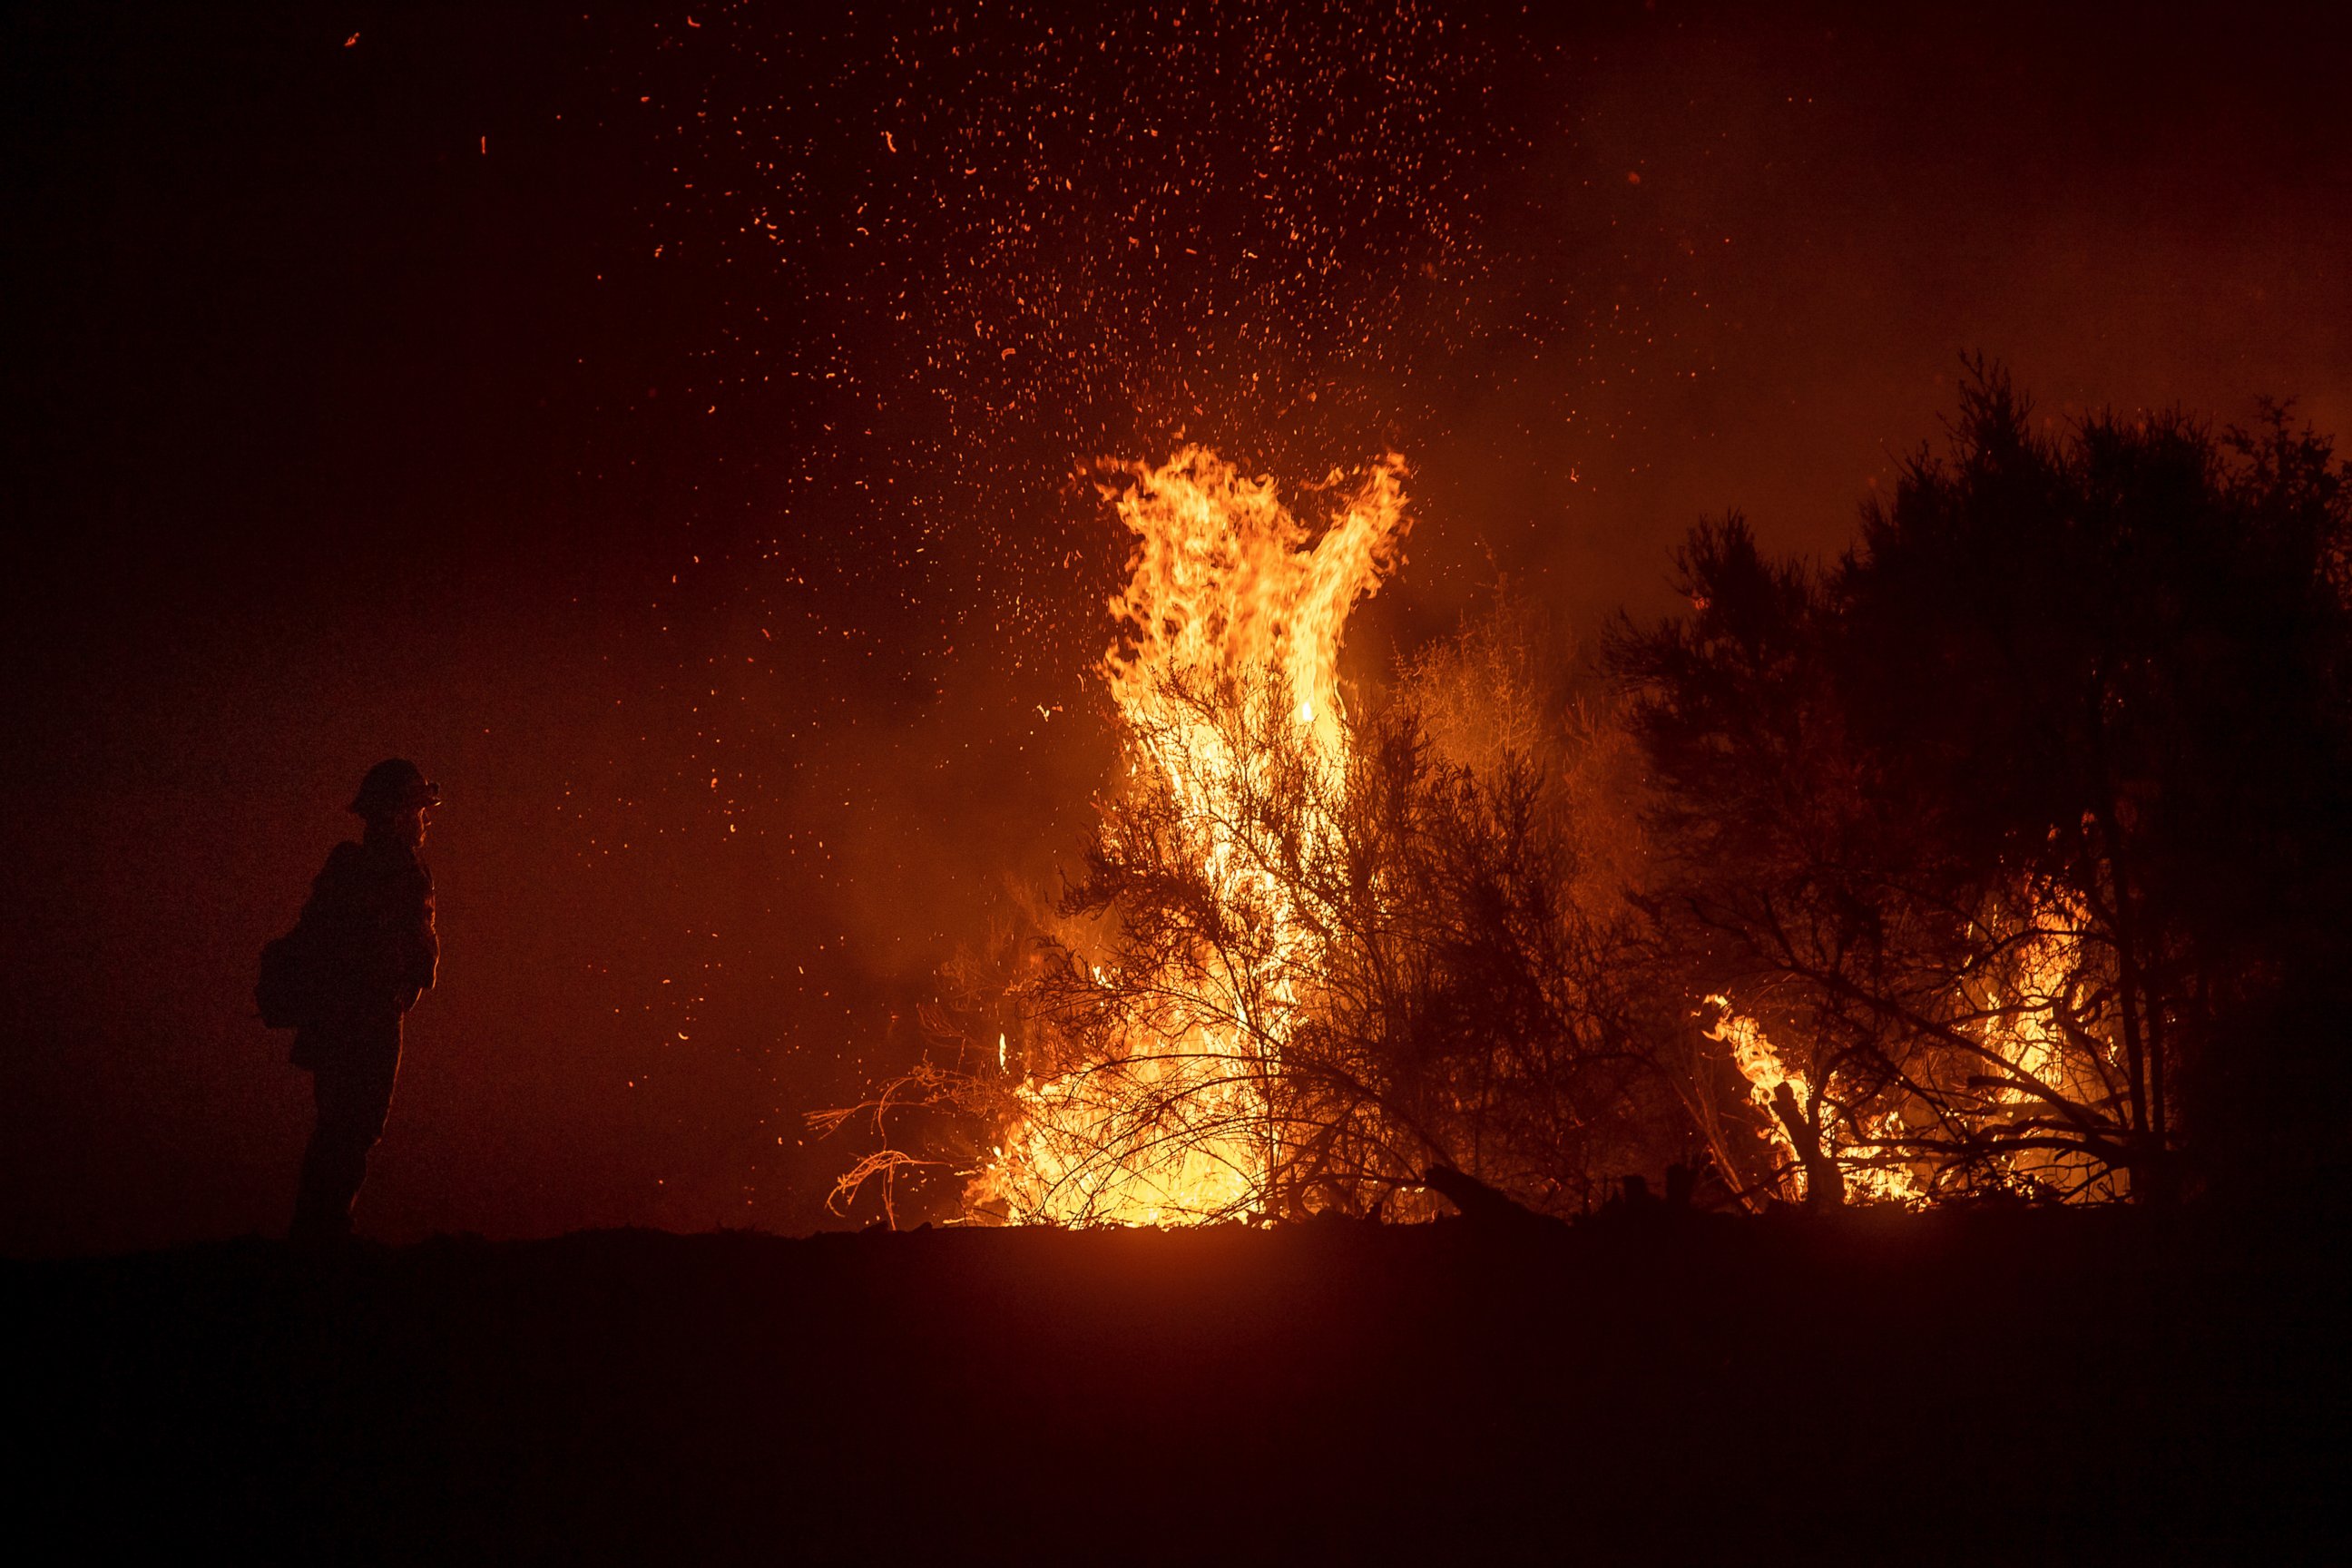 A firefighter monitors a backfire while battling the Ranch Fire, part of the Mendocino Complex Fire, on Tuesday, Aug. 7, 2018, near Ladoga, Calif.